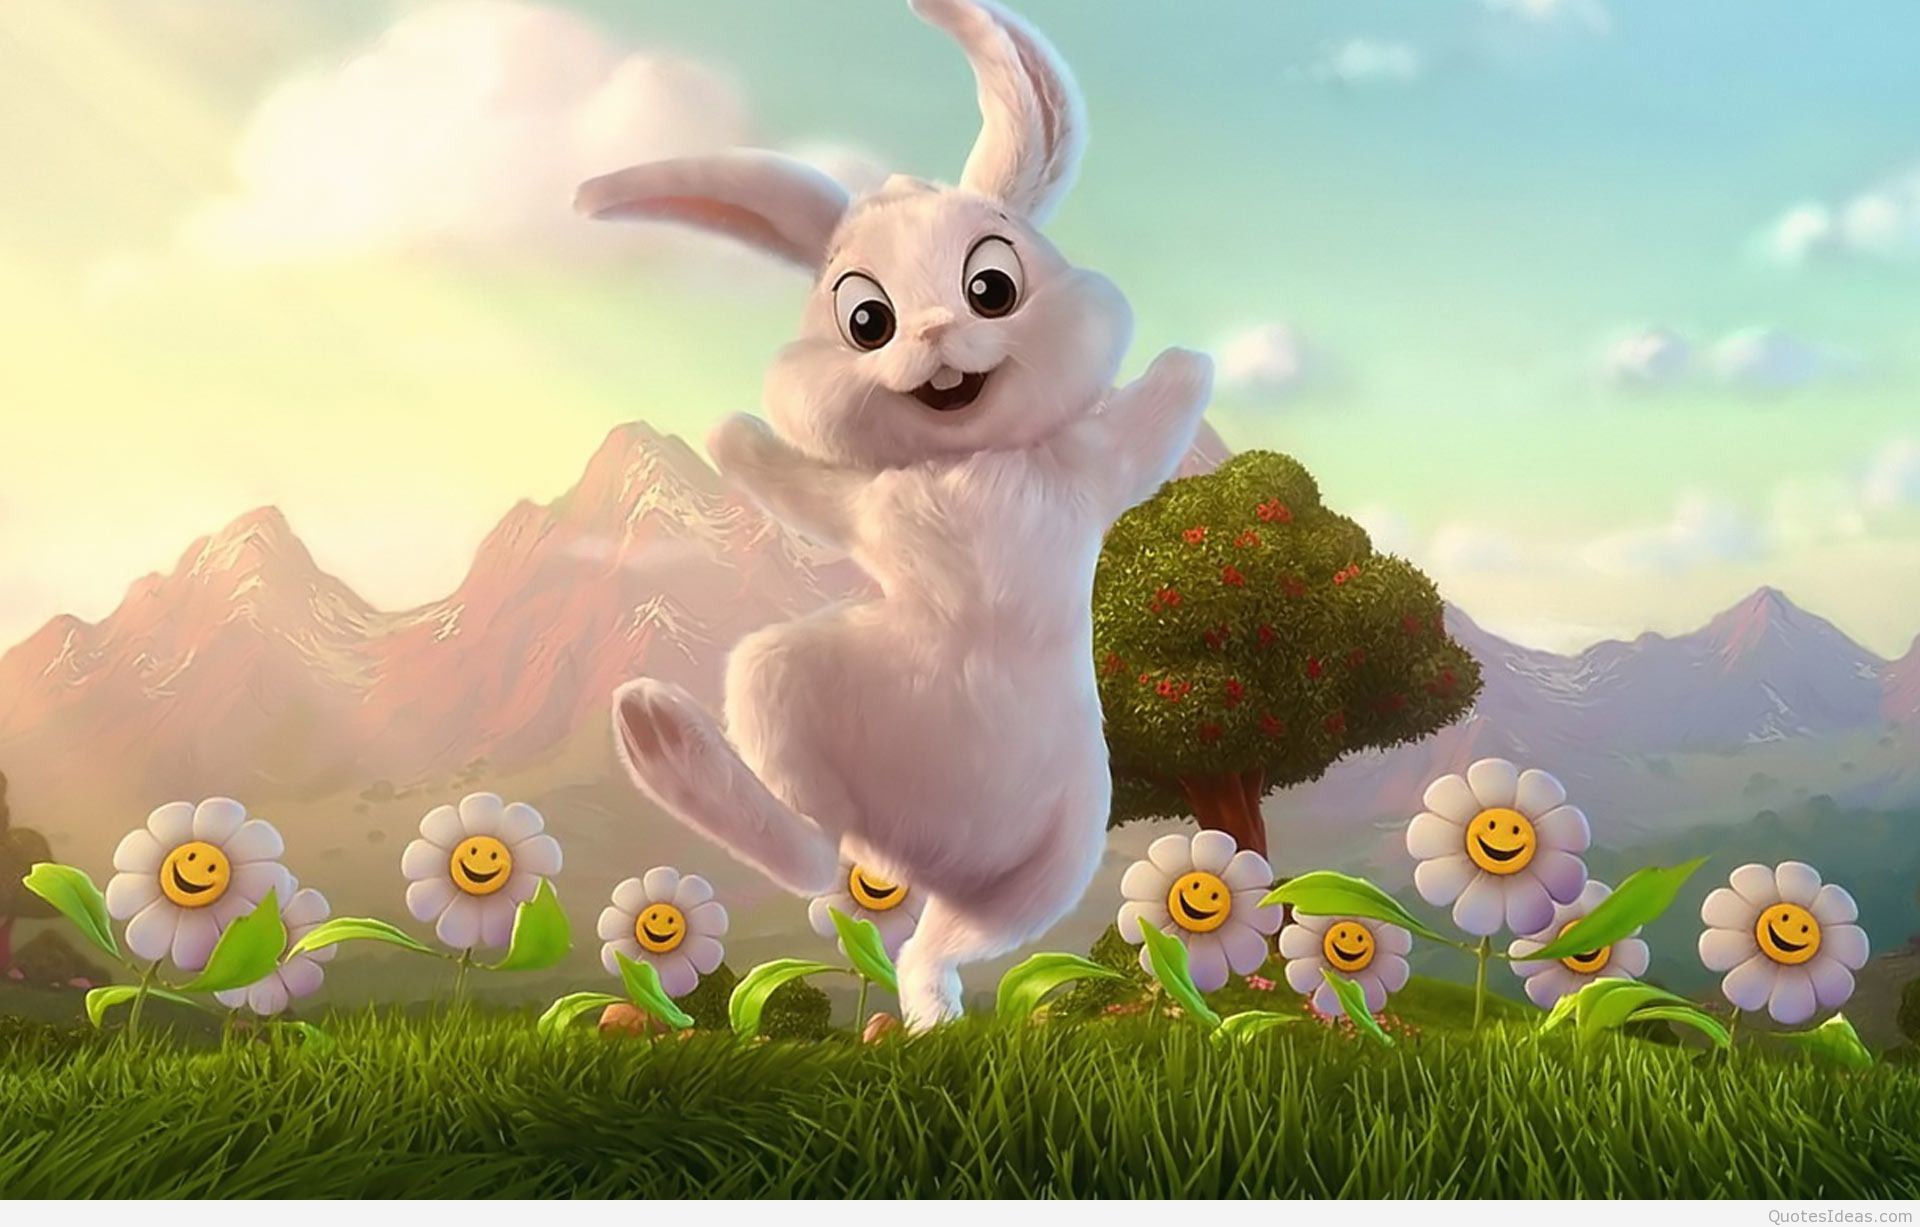 … easter-bunny-holiday-wallpaper-1920×1200-3577 9754012521693bf8f325 …